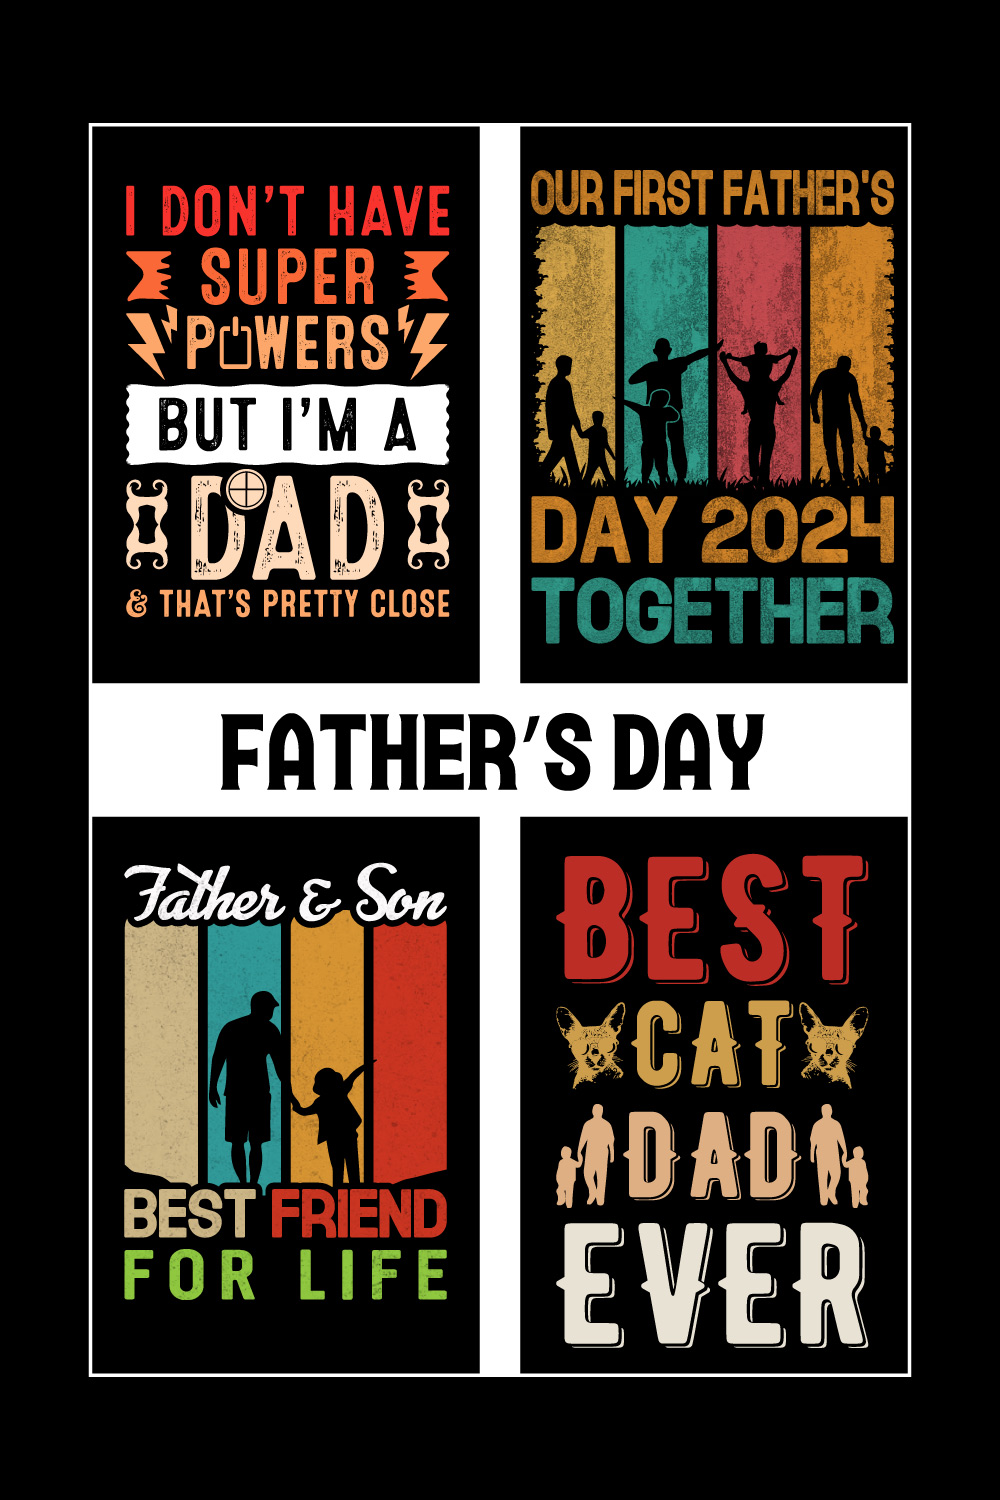 Father's Day T-Shirt- Dad T-Shirt Design- Father day t-shirt- Happy father's day t-shirt design ideas- Dad day- Papa son- fathers day shirt ideas for family- Trendy T-shirt- T-shirt Designs pinterest preview image.